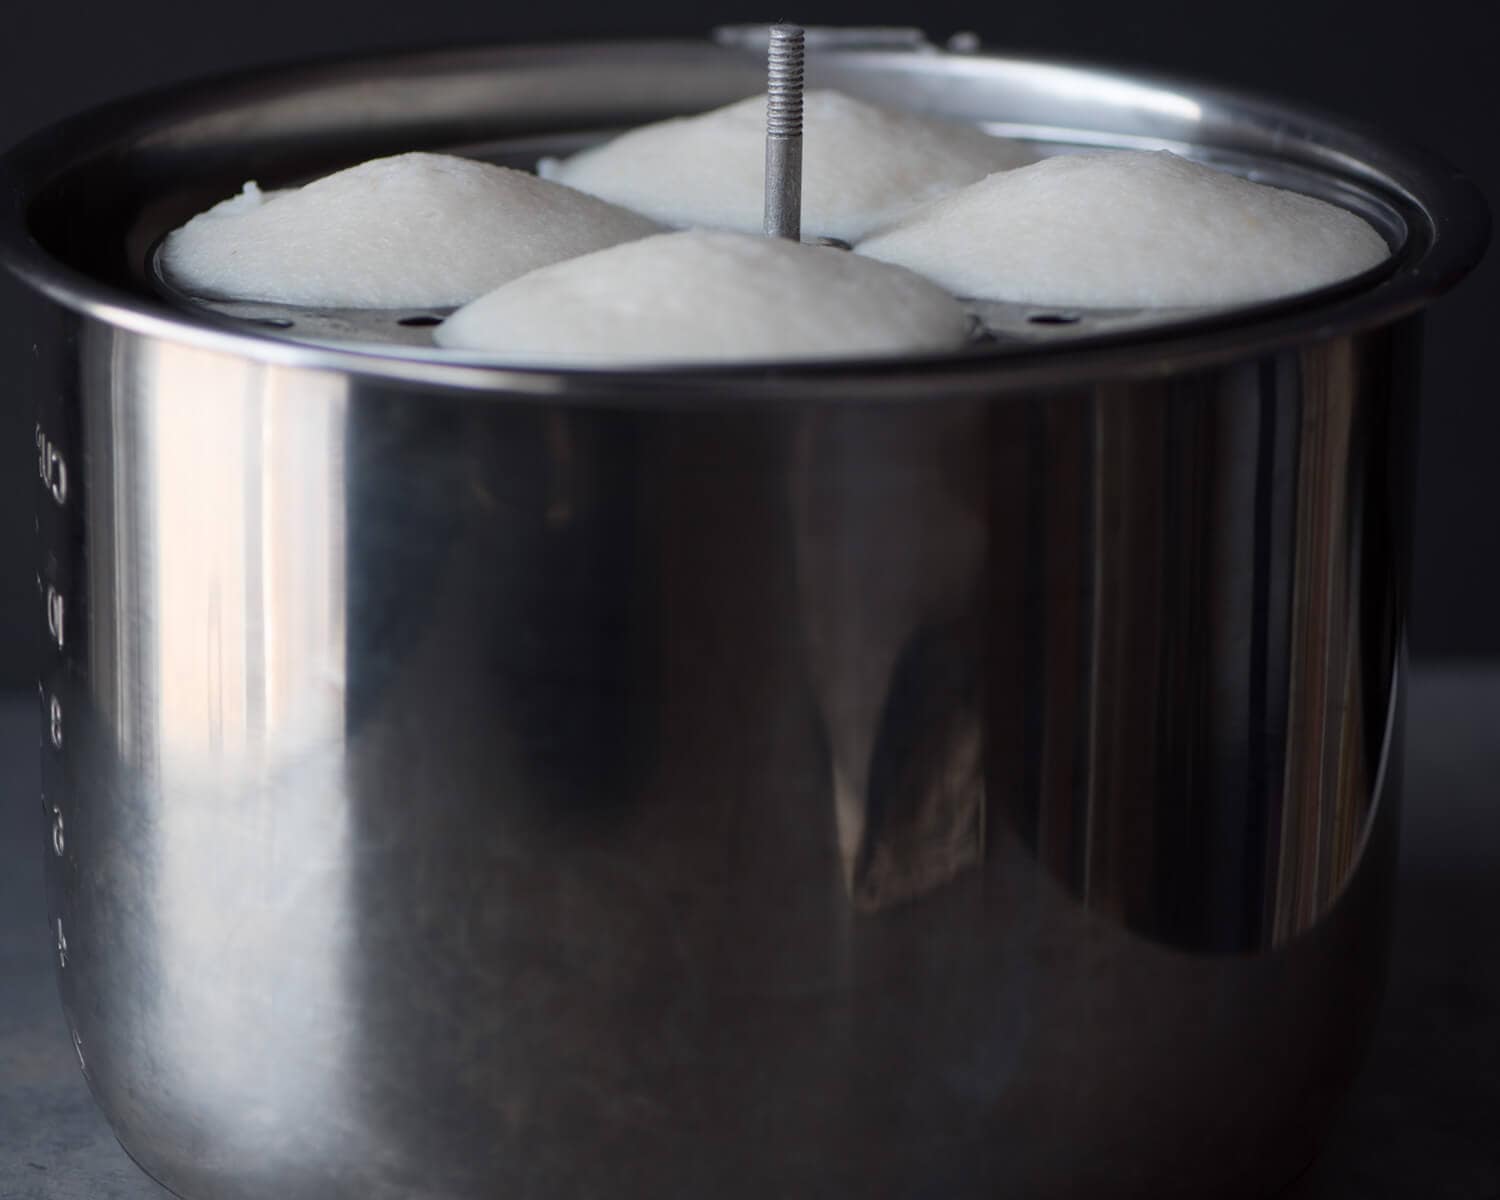 Idli cooked in an Instant Pot